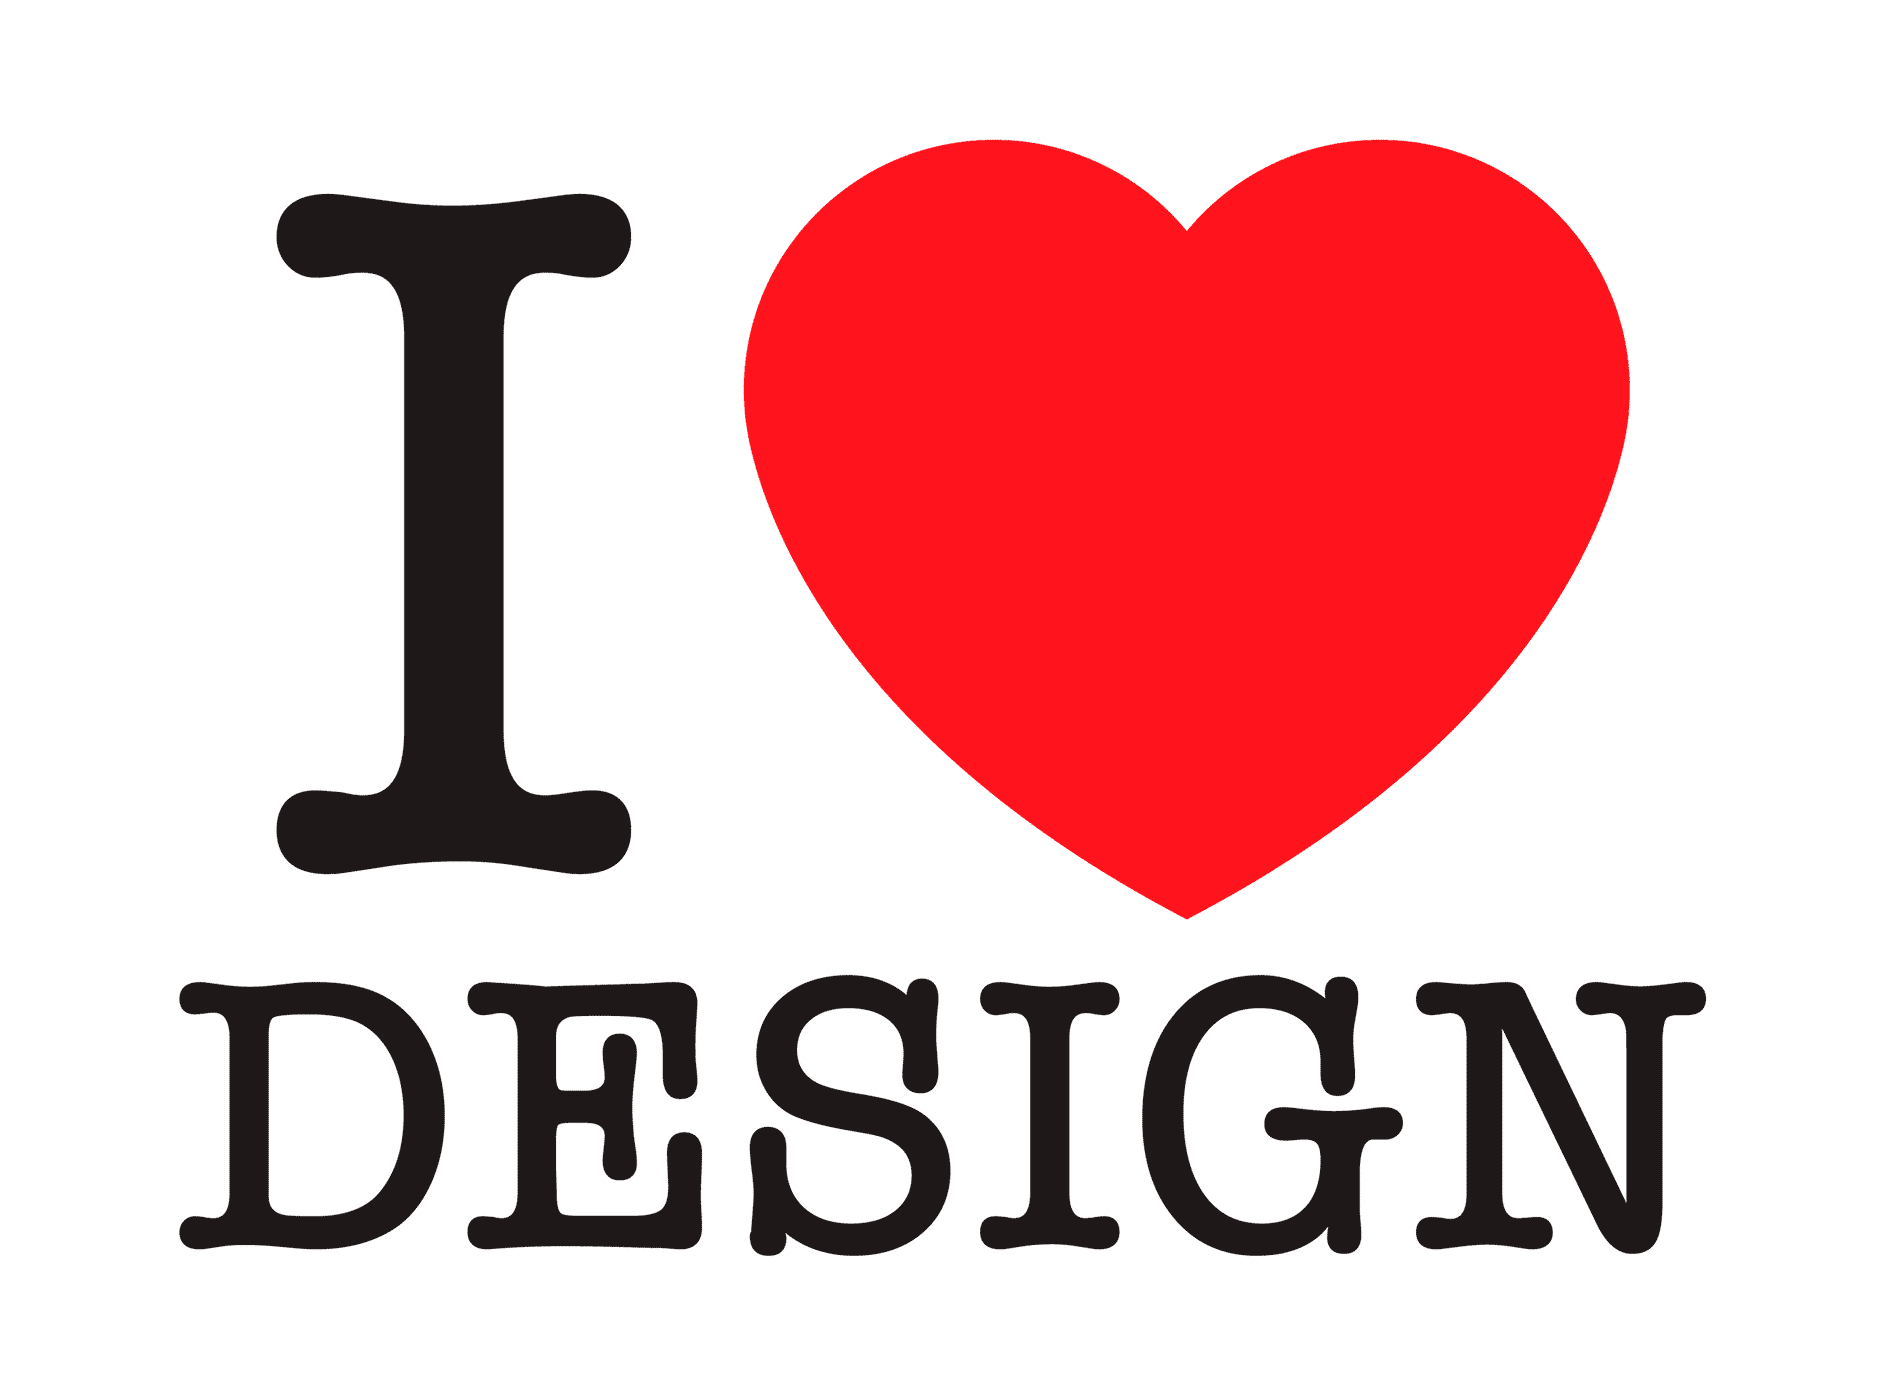 Love You Logo - 10 Things to Look For in a Logo Design Company